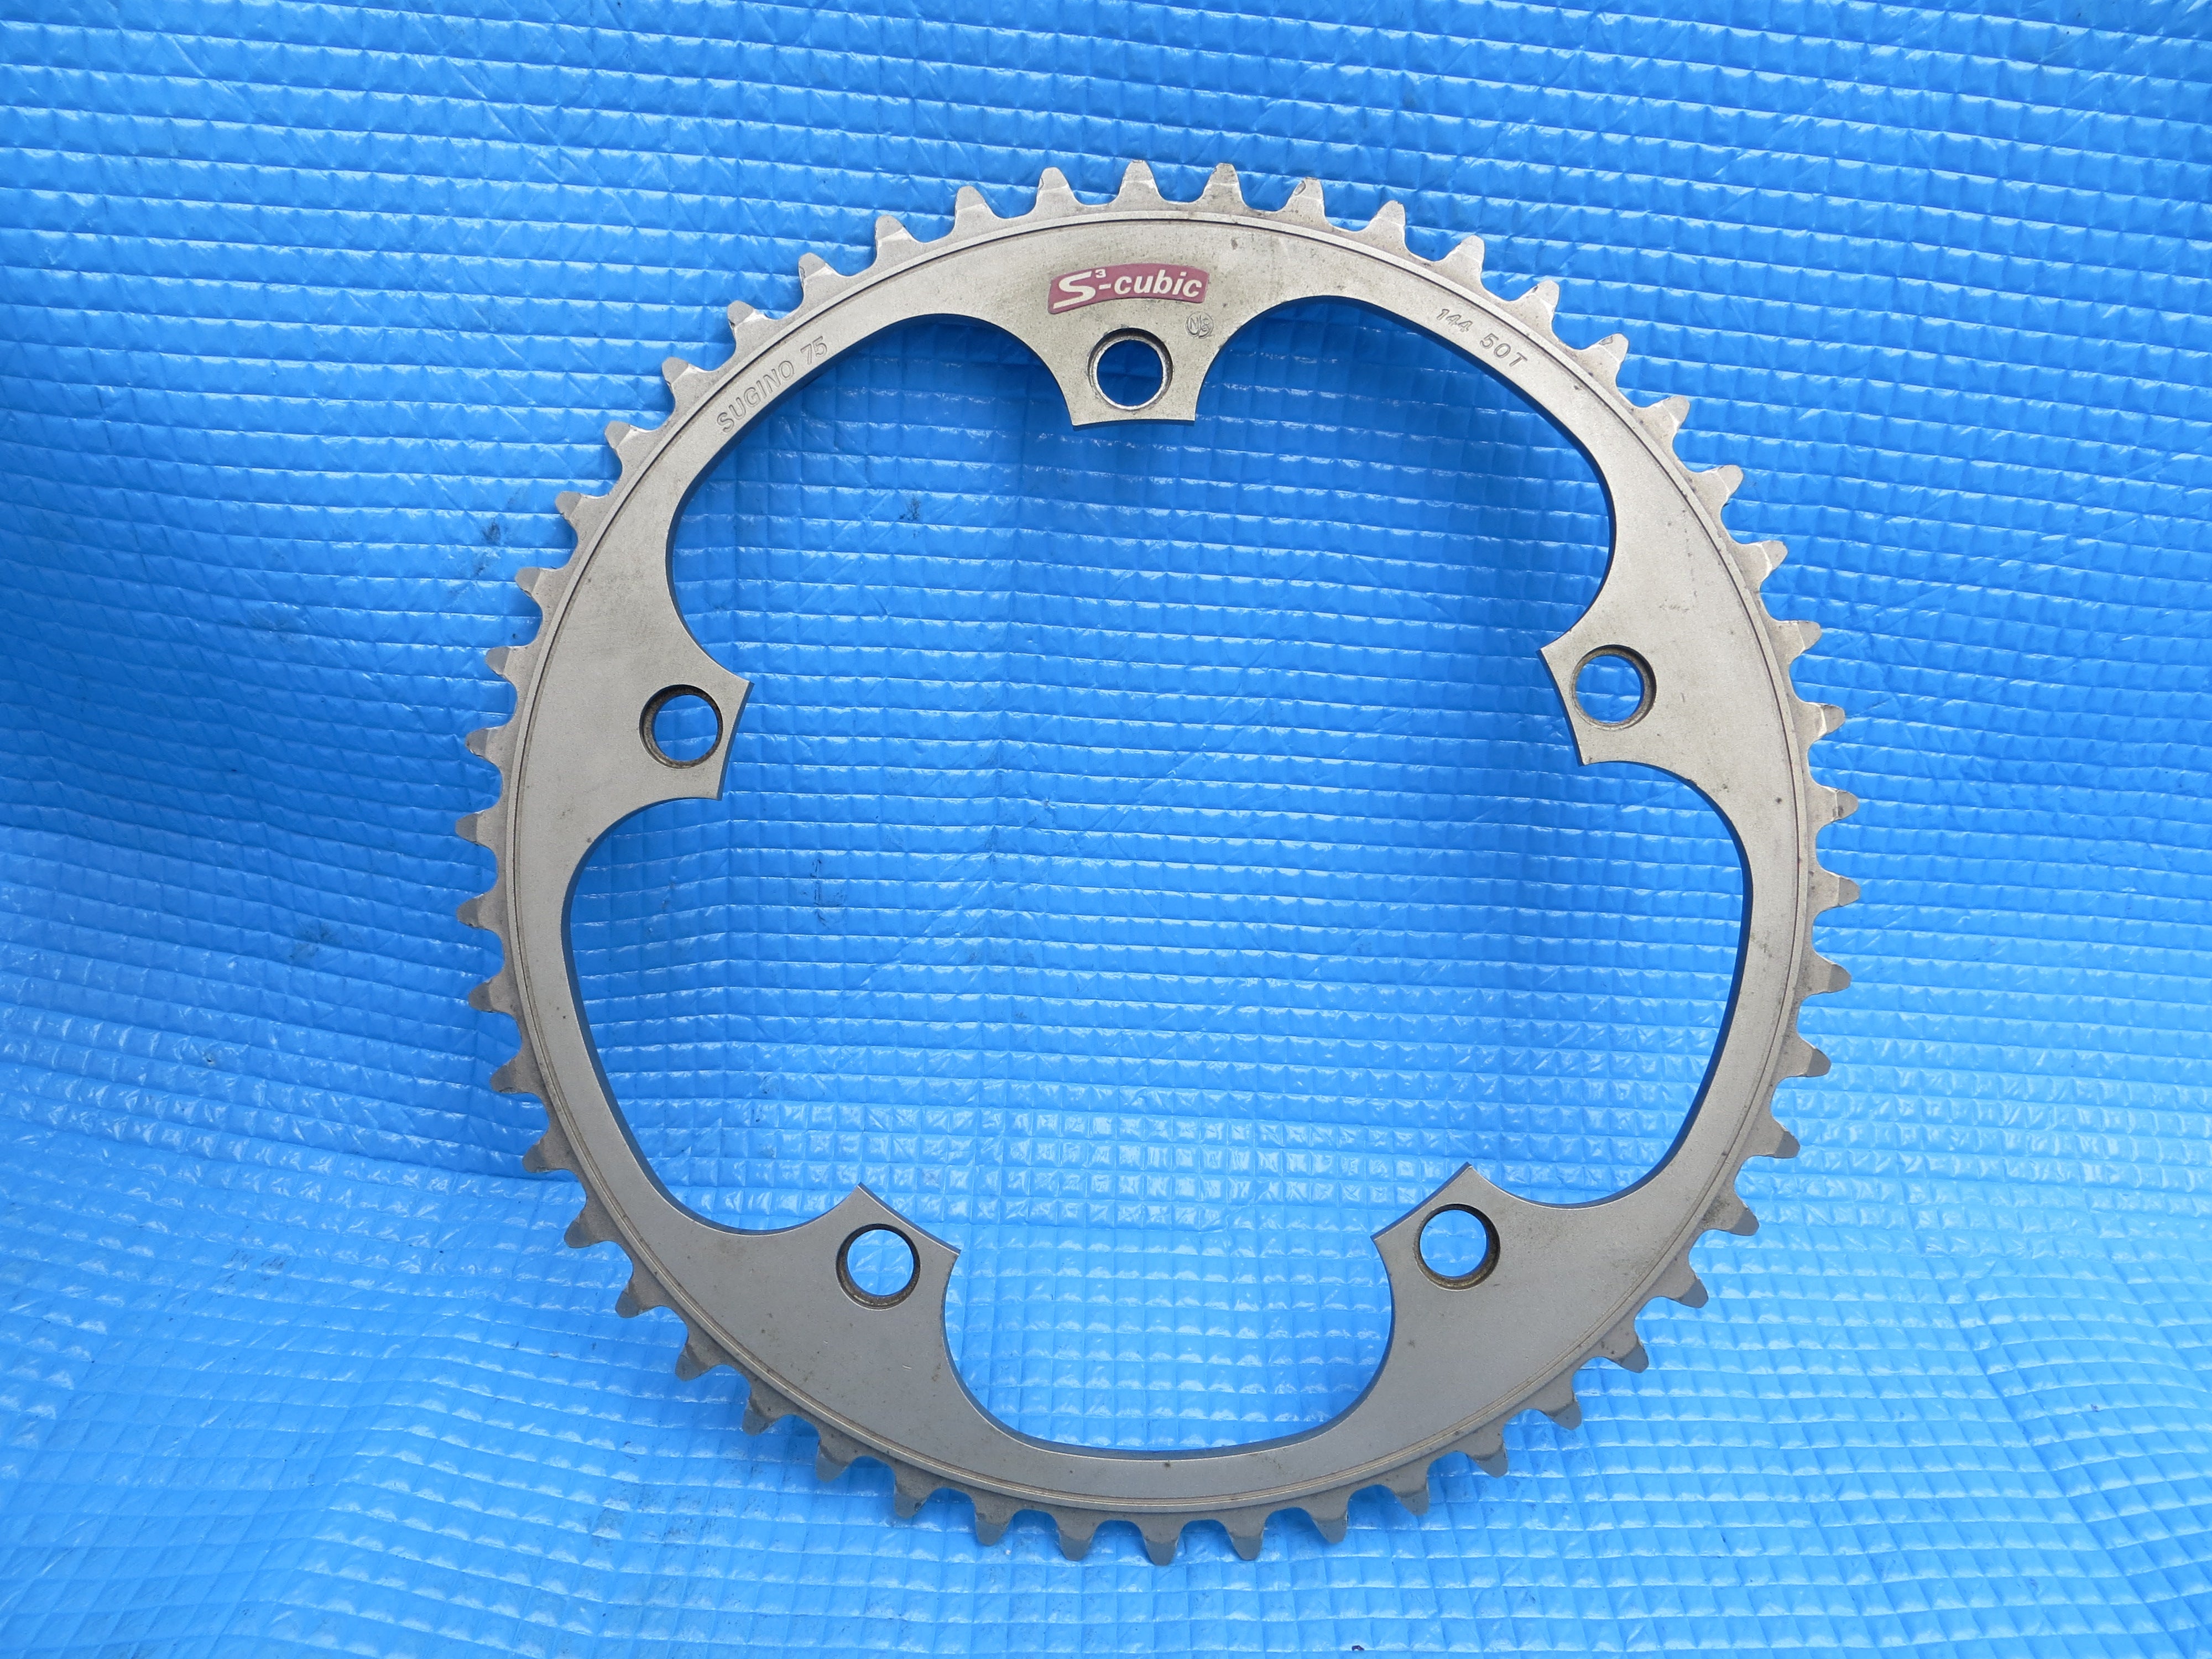 Sugino 75 S-cubic 1/8" 144BCD NJS Chainring 50T Matte Finish (22090307)